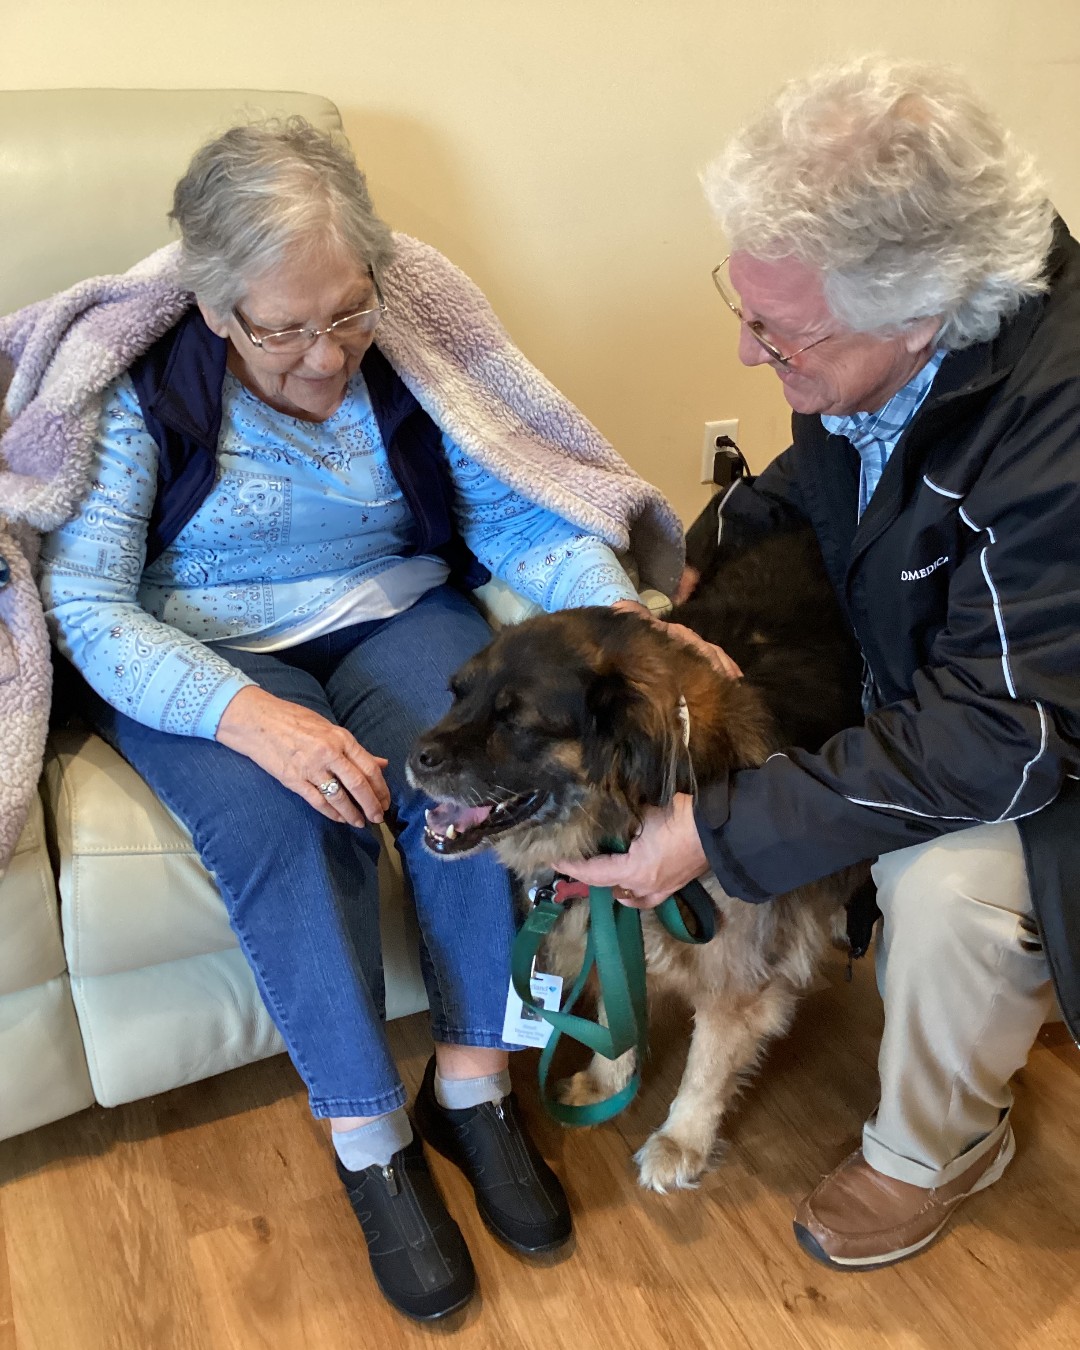 Discover the therapeutic benefits of dog guests, from companionship and joy to emotional support and increased social interaction.